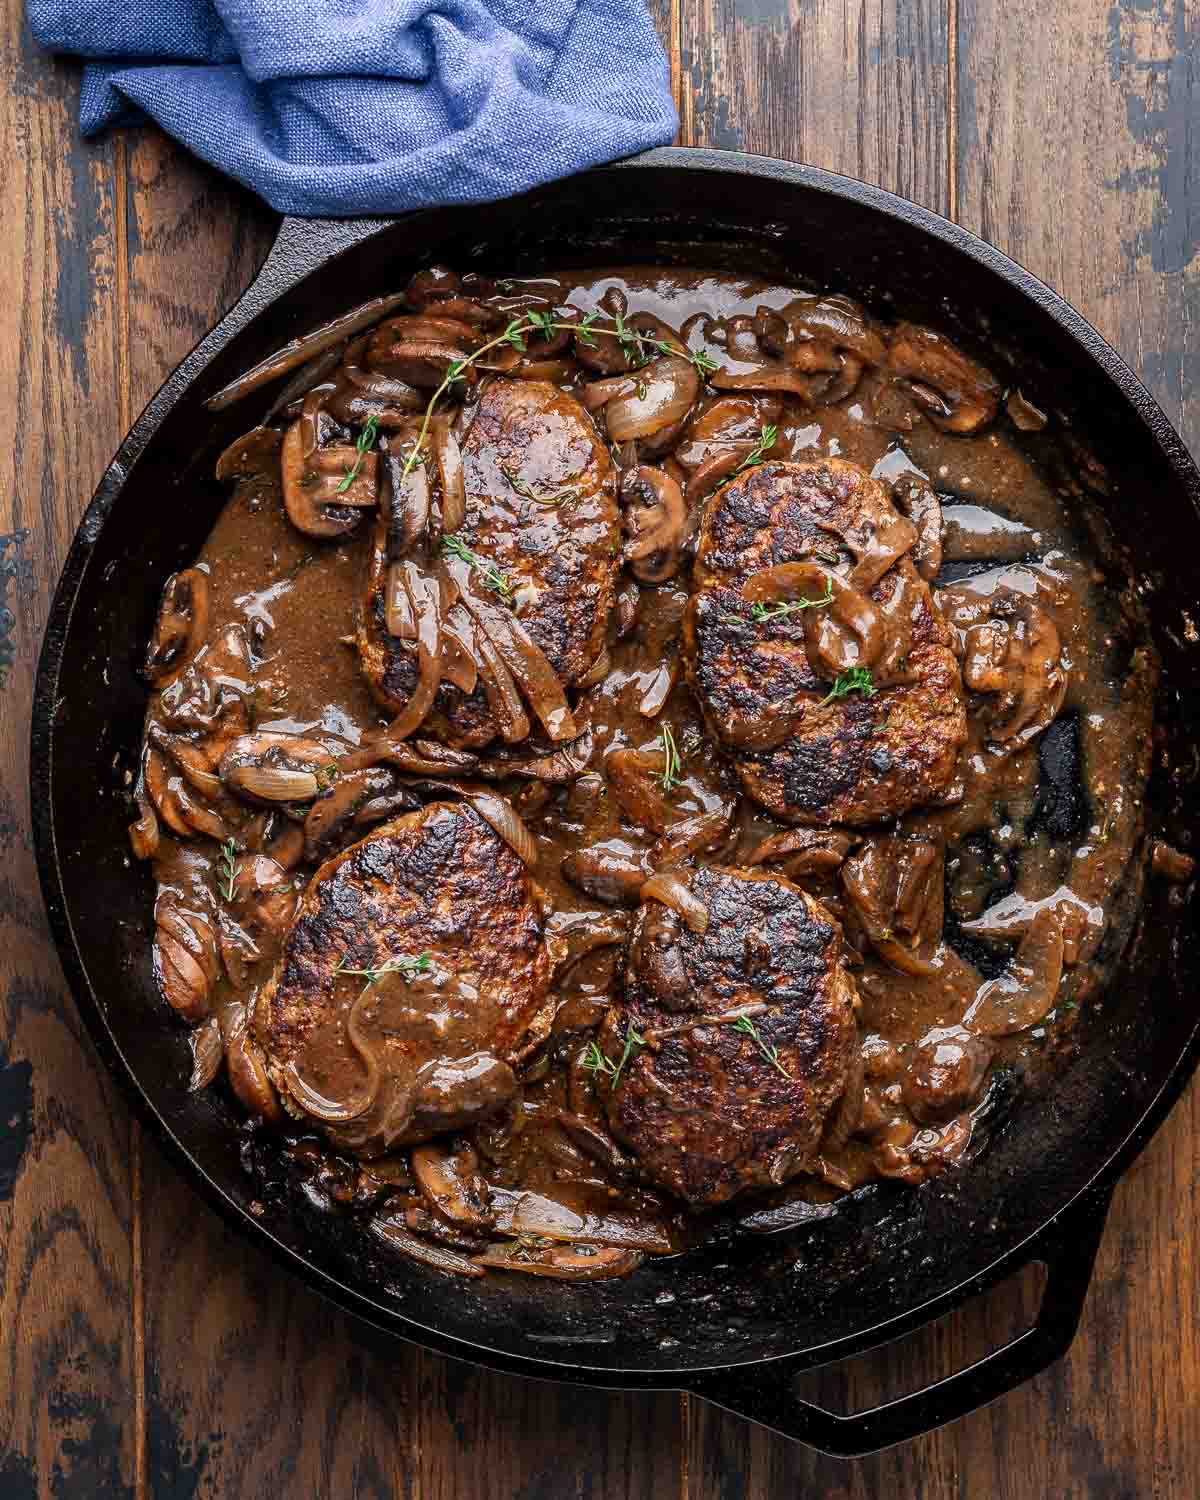 Cast iron pan with salisbury steaks topped with mushroom gravy on wood table.